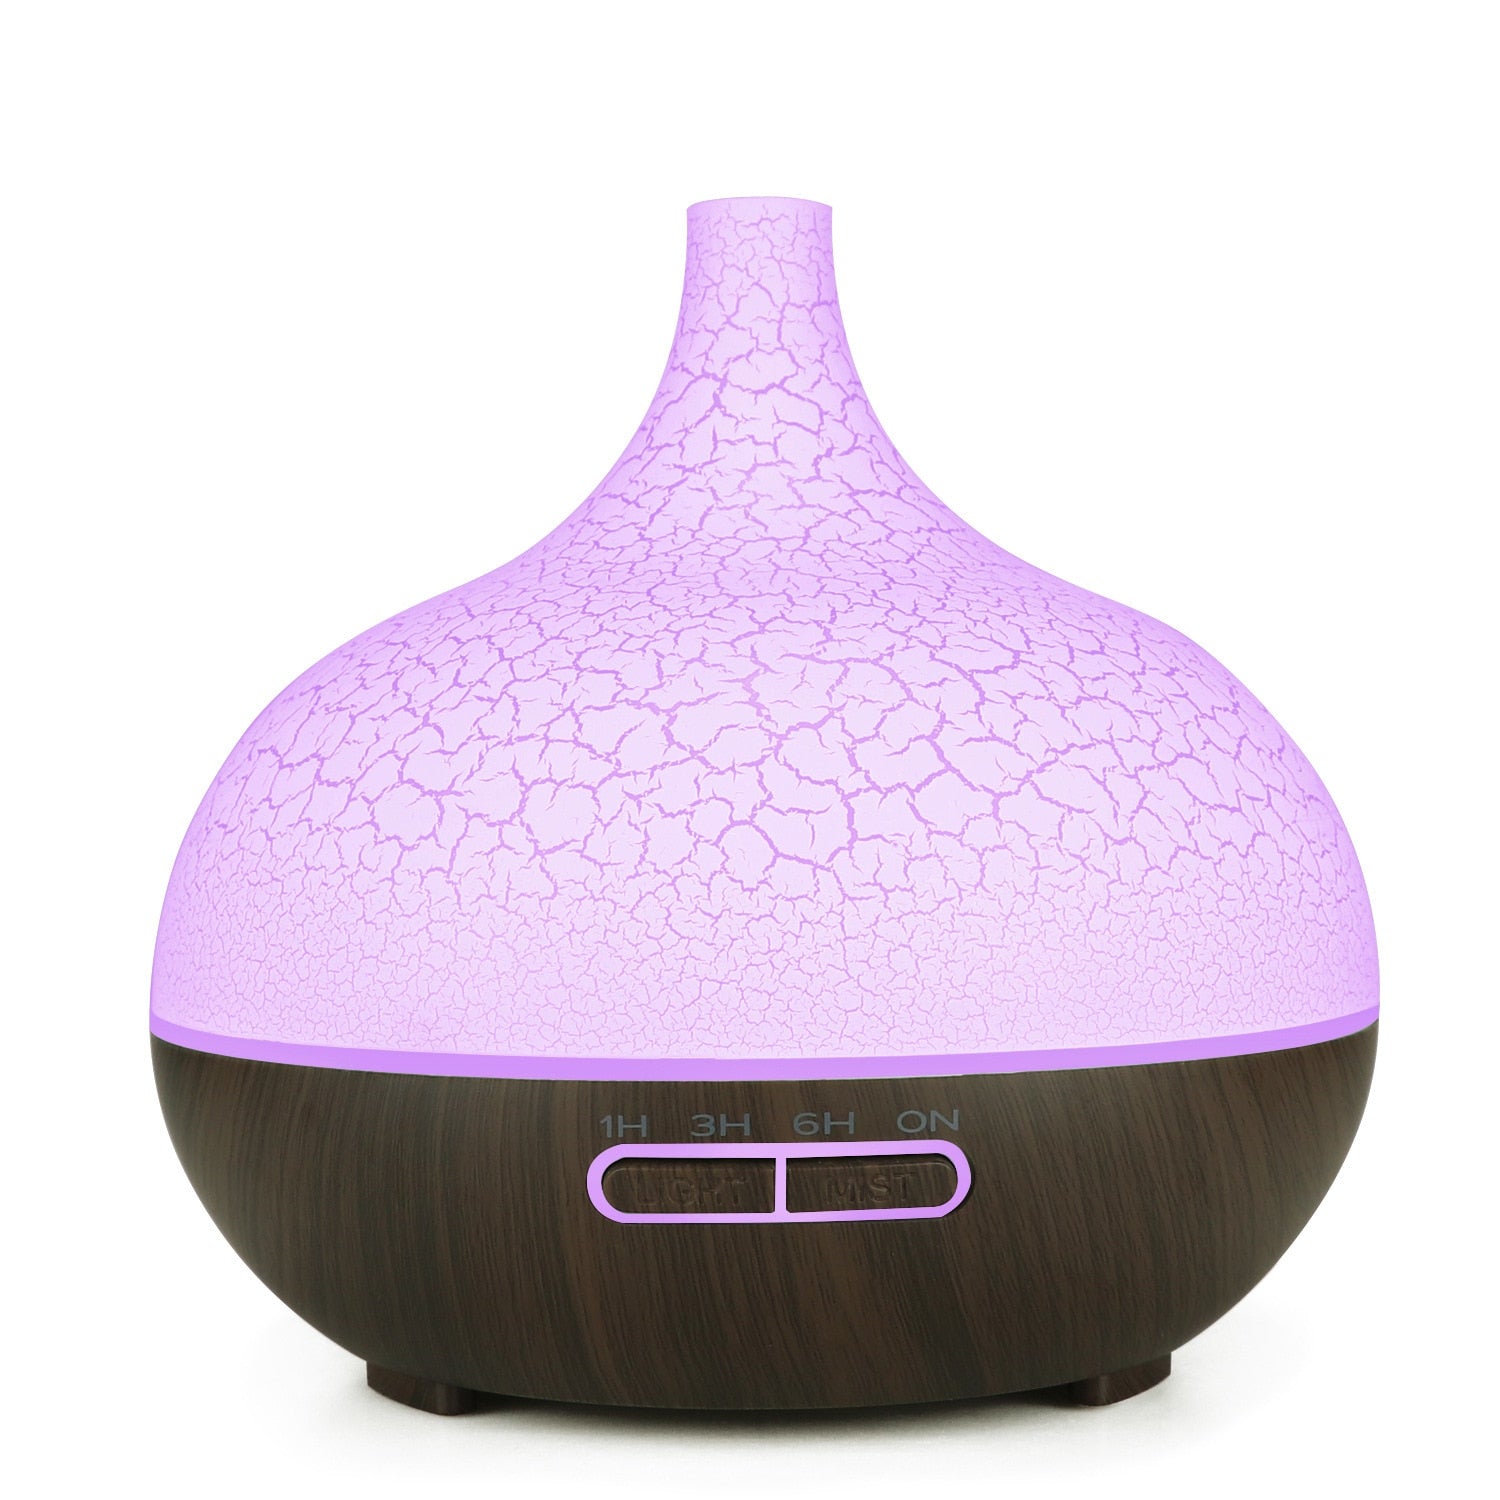 High-Quality 550ml Aromatherapy Essential Oil Diffuser Wood Grain Remote Control Ultrasonic Air Humidifier with 7 Colors Light